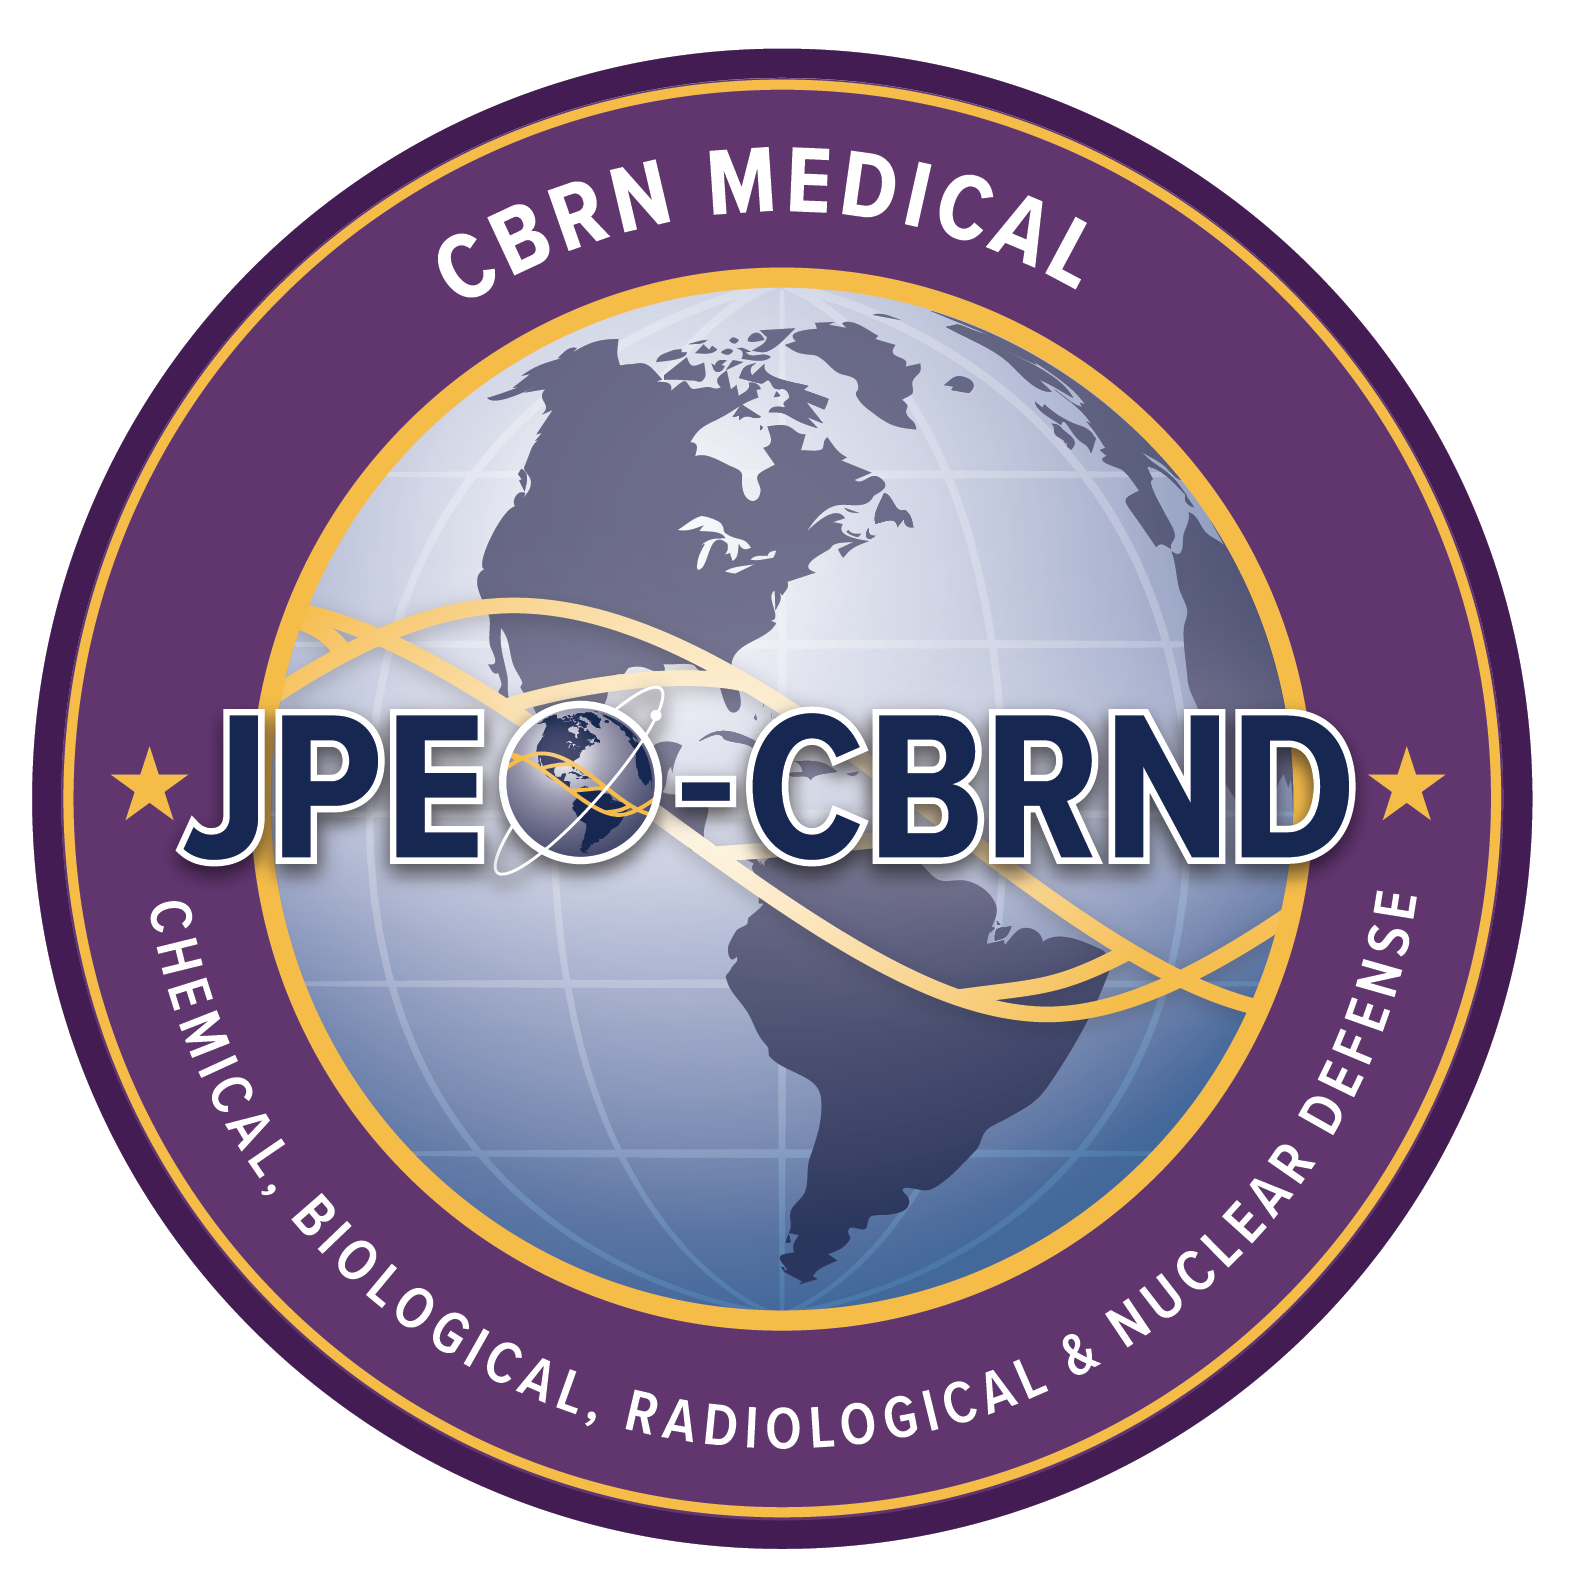 Joint Project CBRN Medical